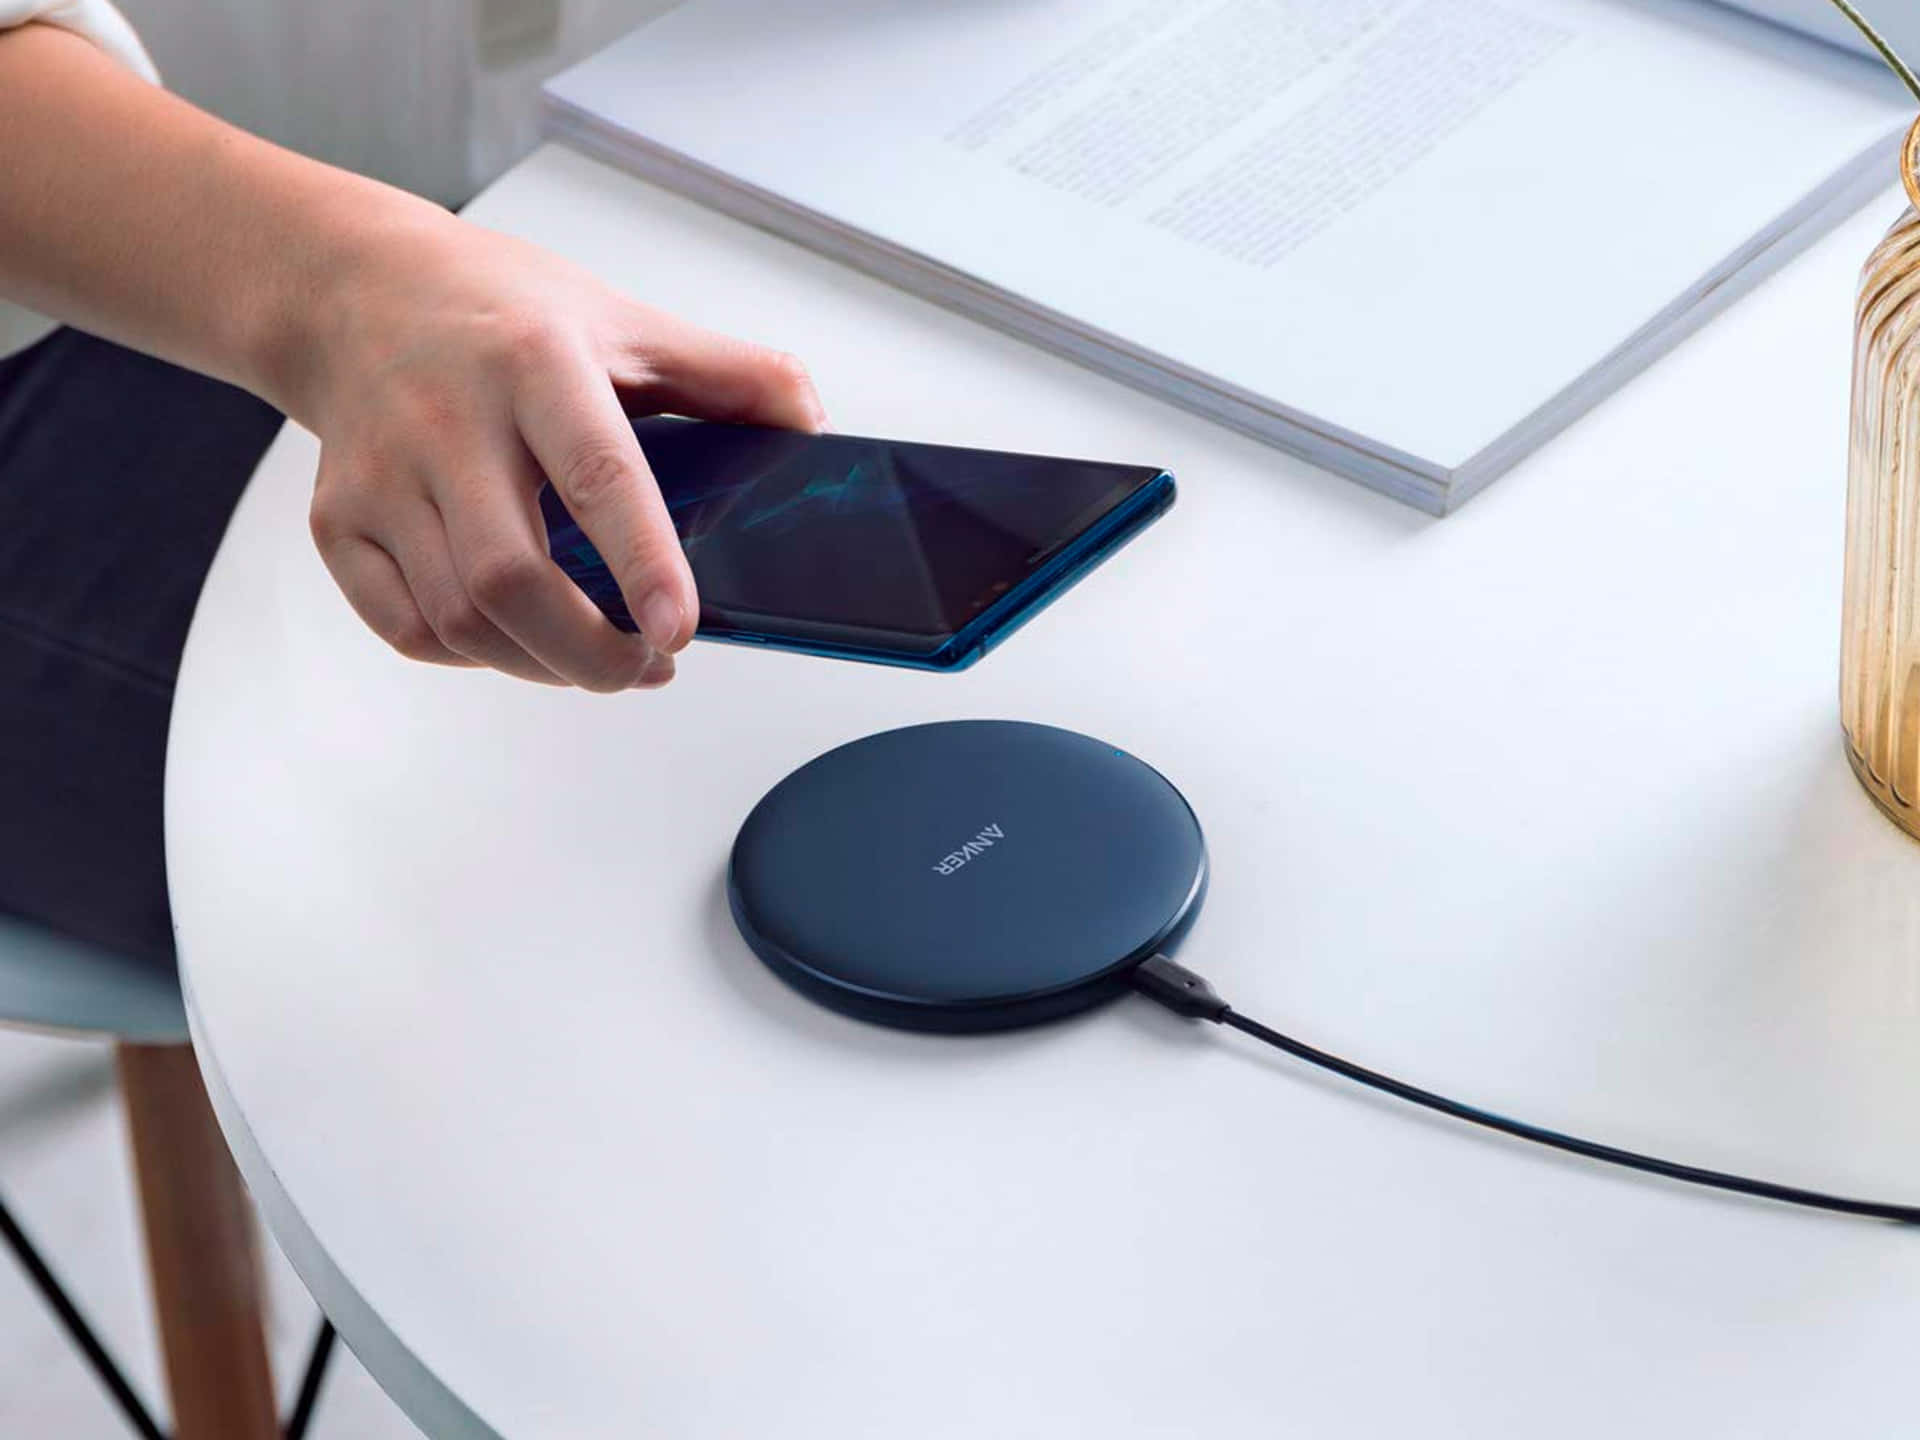 Wireless Charging: The Future Of Charging Devices" Wallpaper